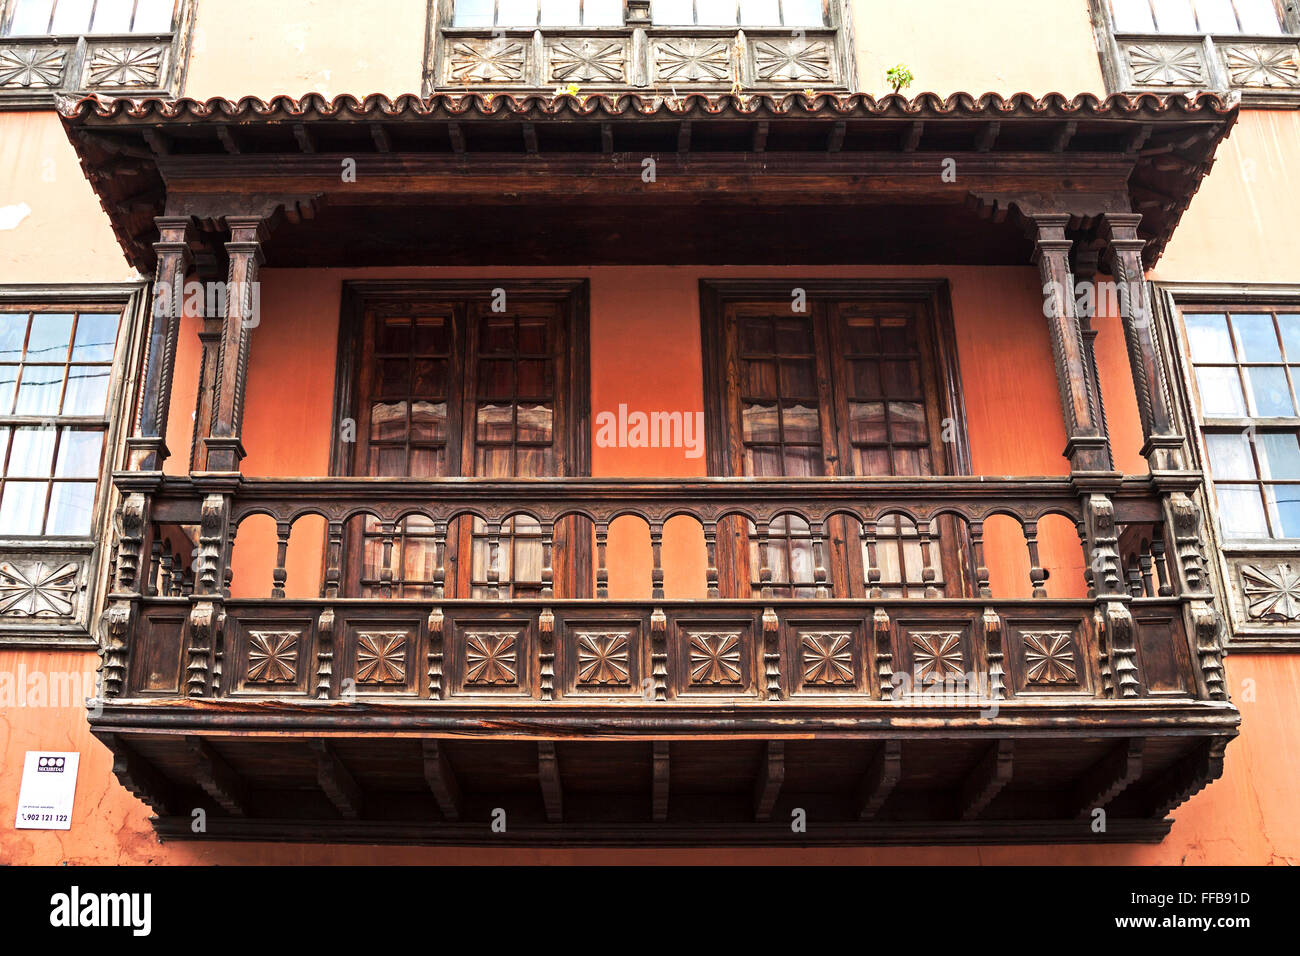 Canarian wooden balcony of a mansion in the historic center of La Orotava, Tenerife, Canary Islands, Spain Stock Photo